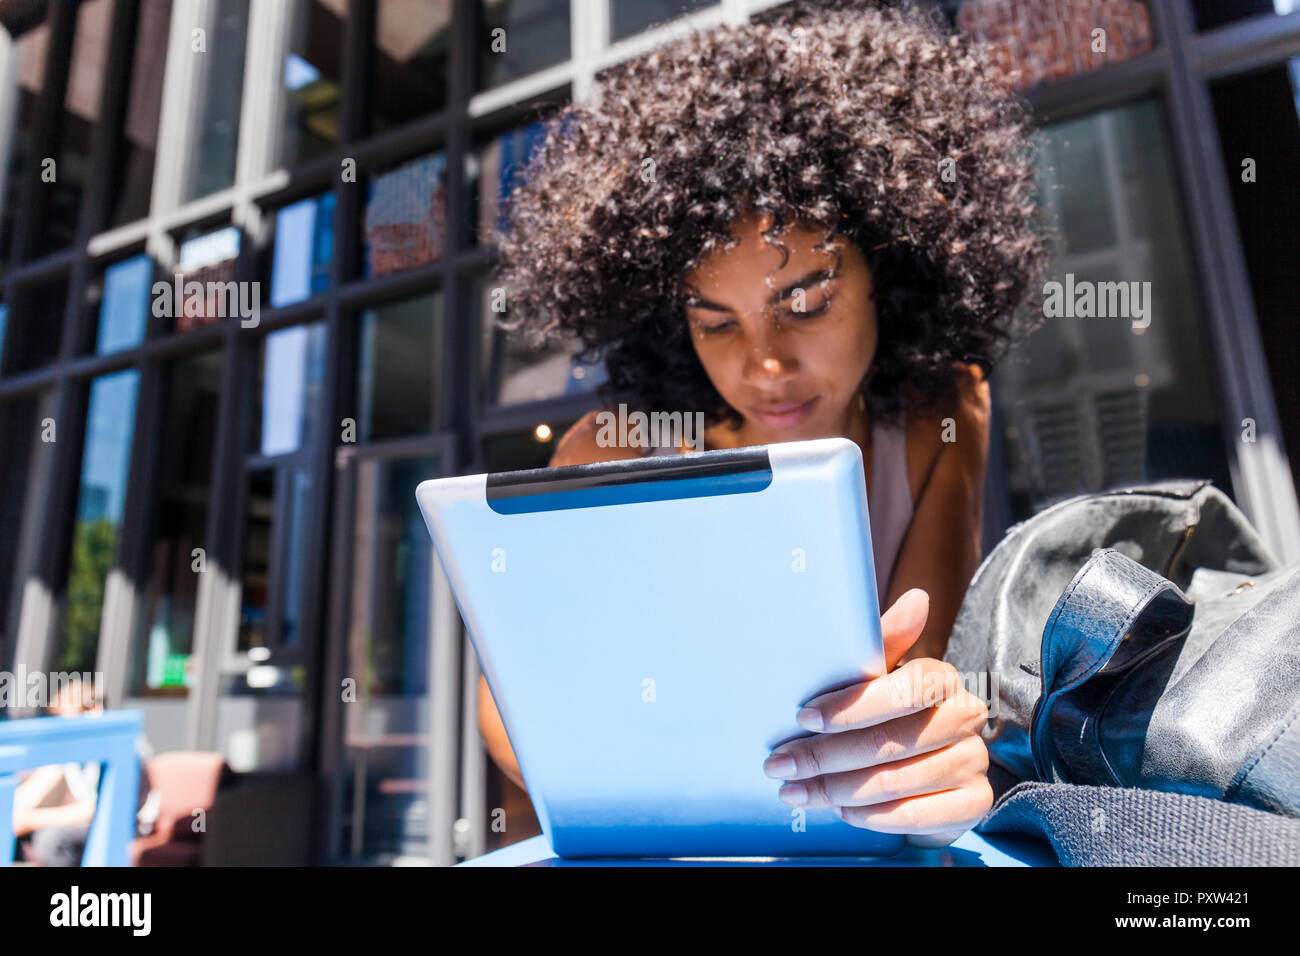 Young woman with curly using tablet in the city Stock Photo